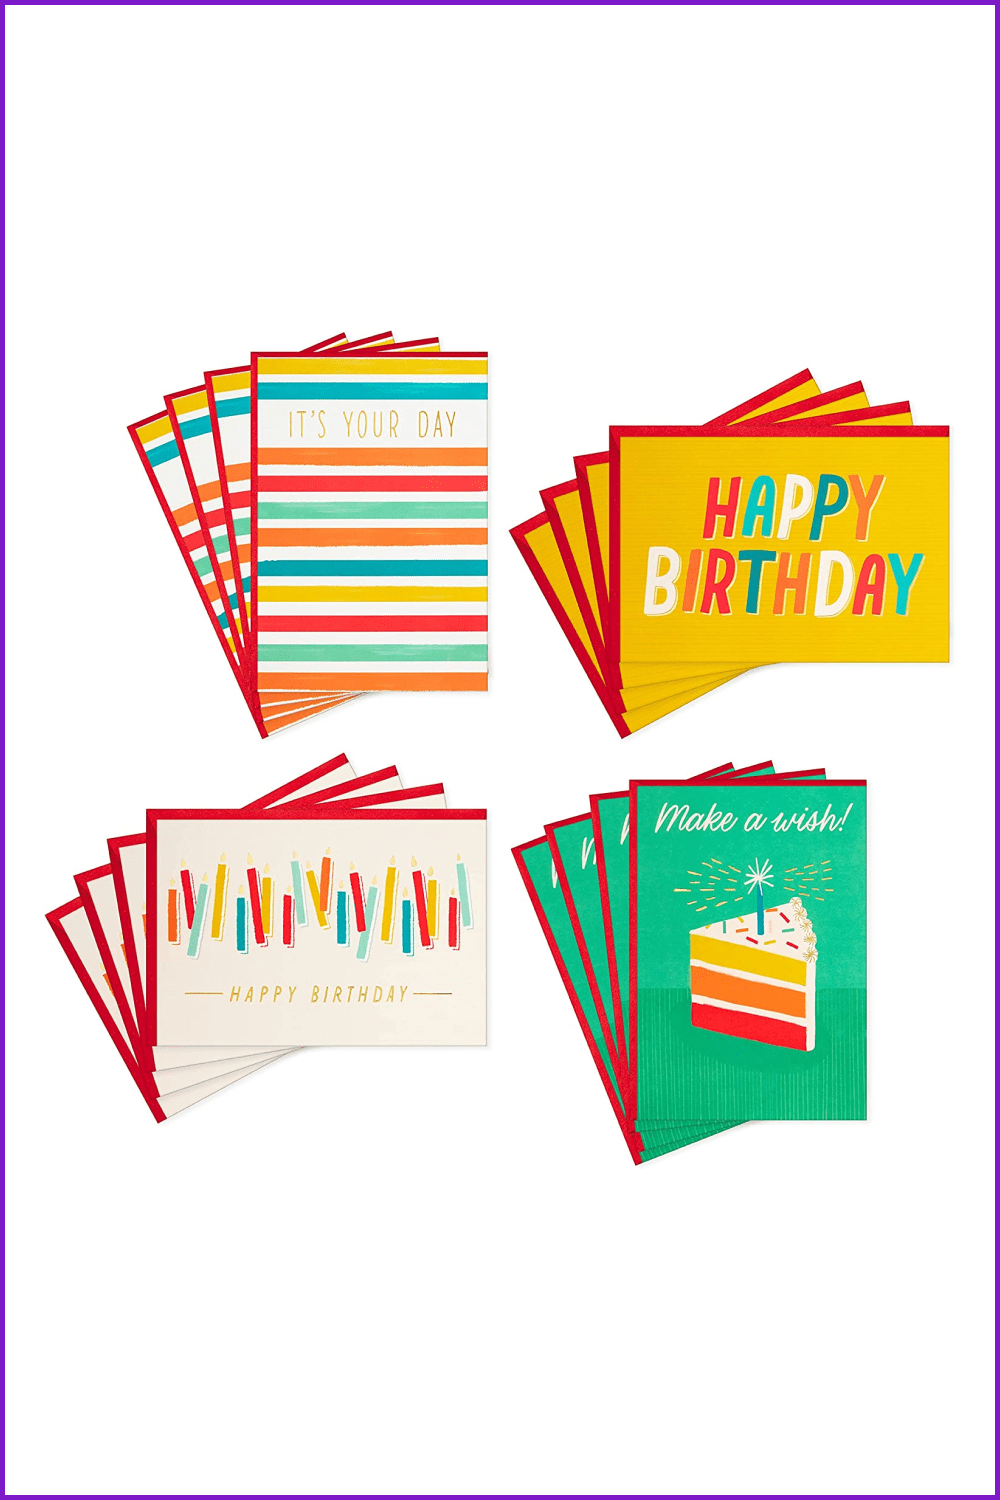 Collage of colorful birthday cards with cake and candles.